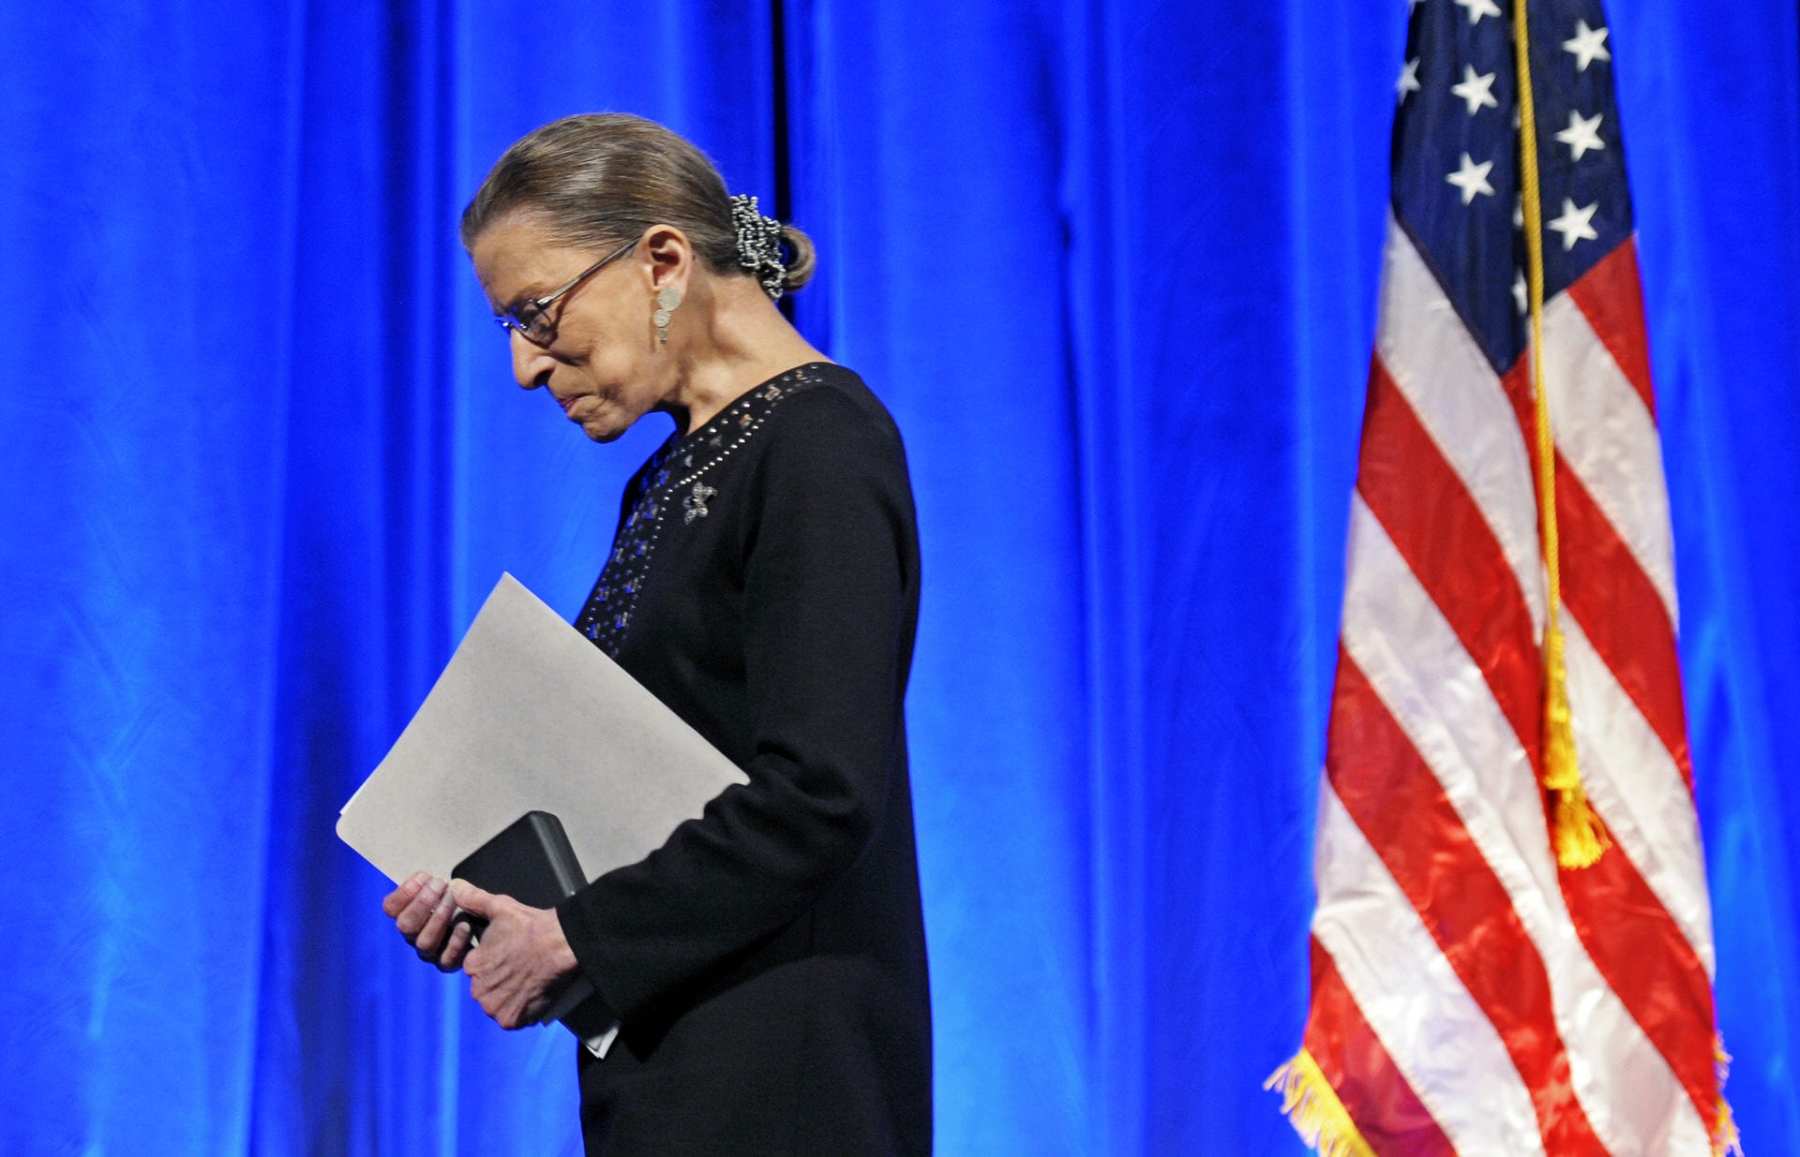 Ruth Bader Ginsburg on stage.